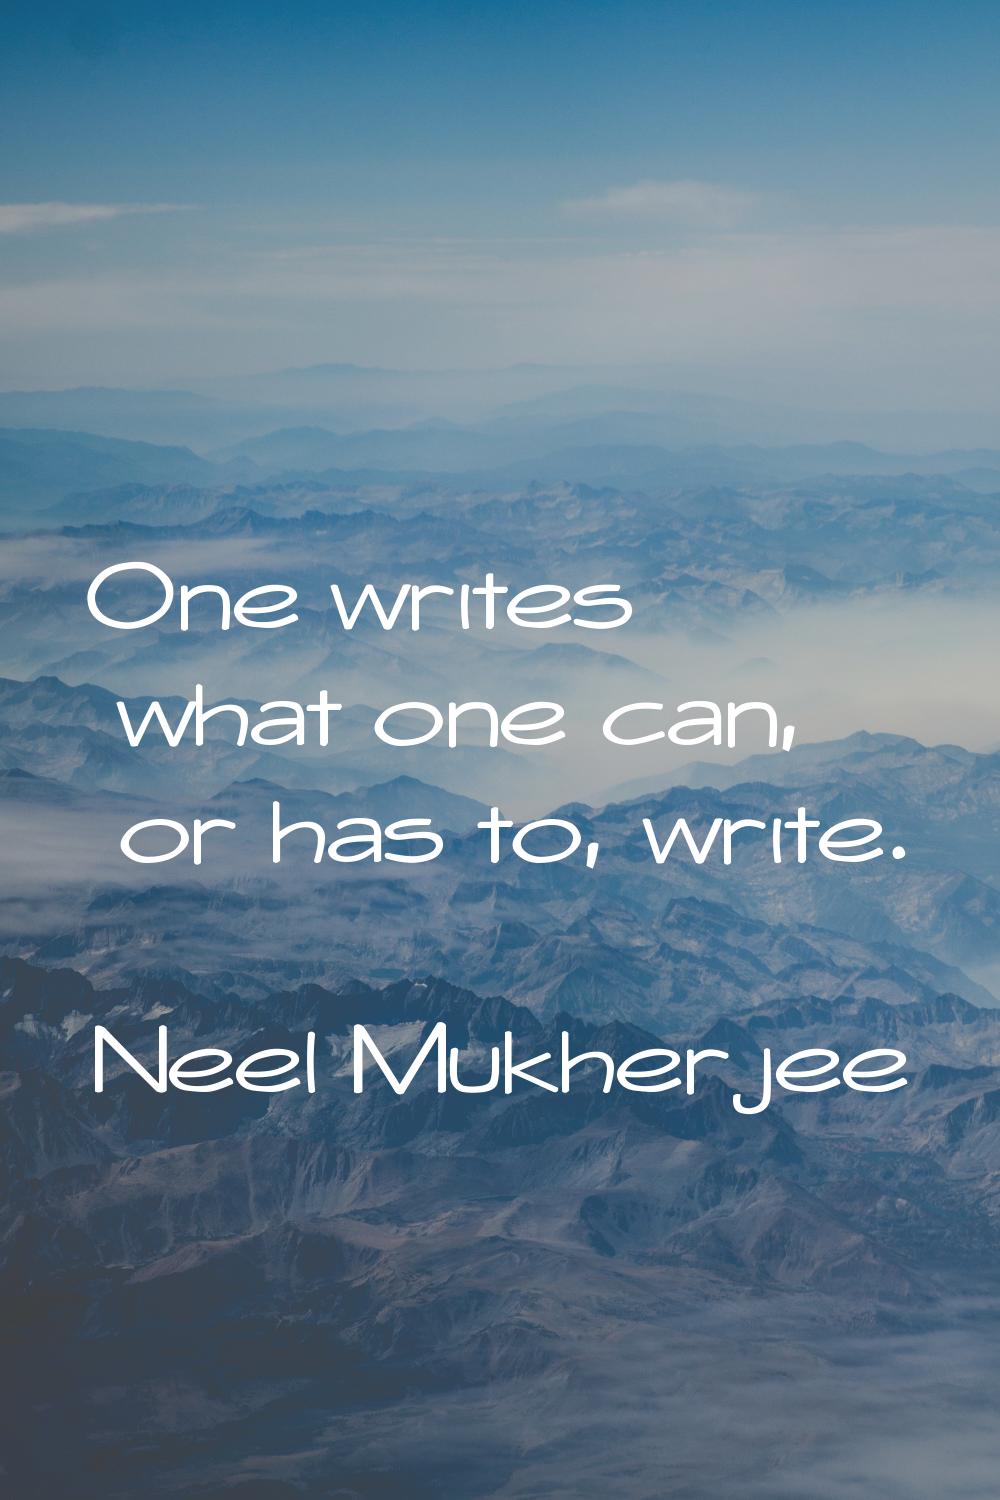 One writes what one can, or has to, write.